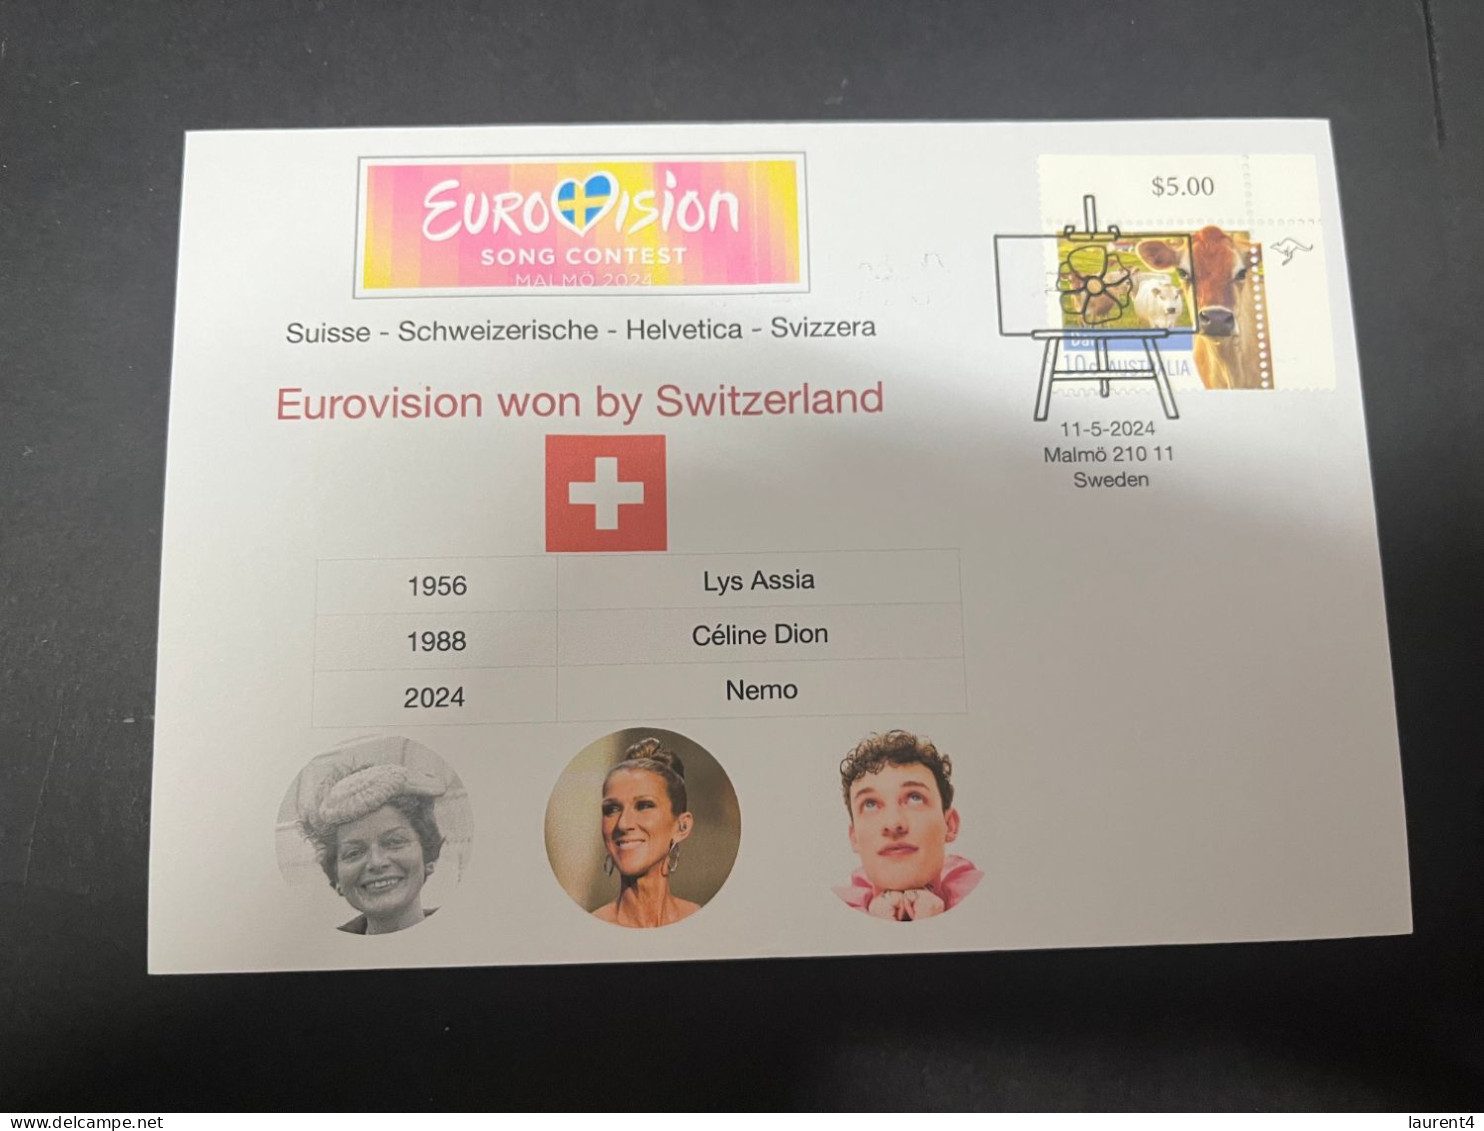 13-5-2024 (5 Z 2) Eurovision Song Contest 2024 - 1st (3rd Win For Switzerland) 1956 Lys Assia - 1988 Céline Dion - Musique